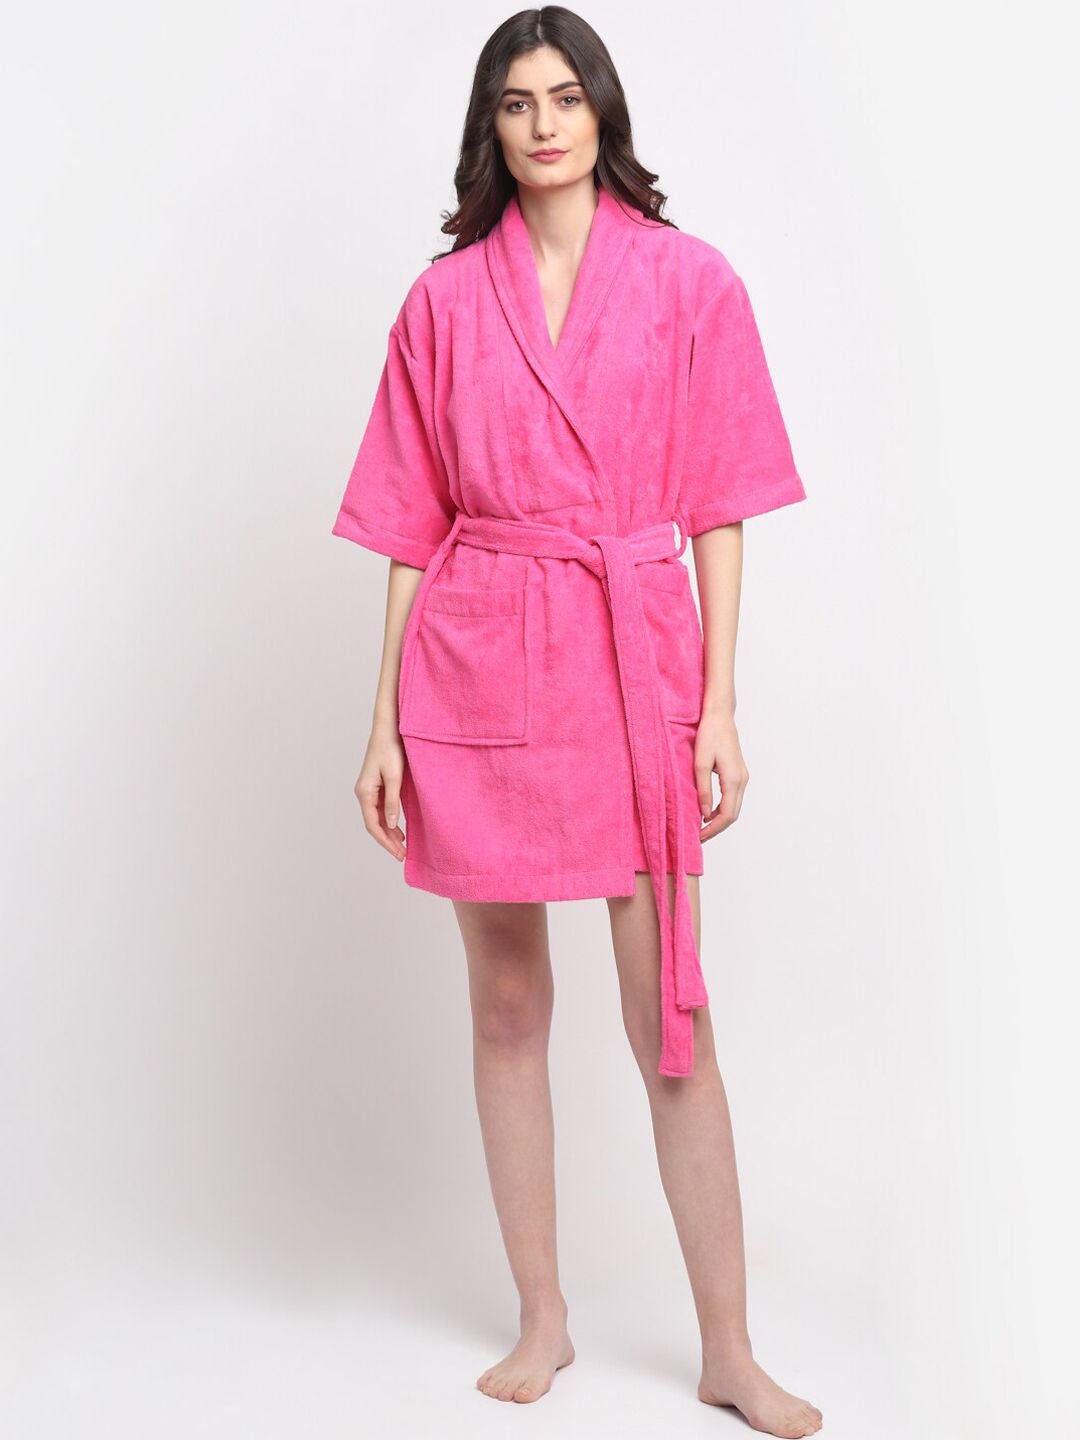 Creeva Pink Solid 380 GSM Luxury Small Size Bathrobe Price in India